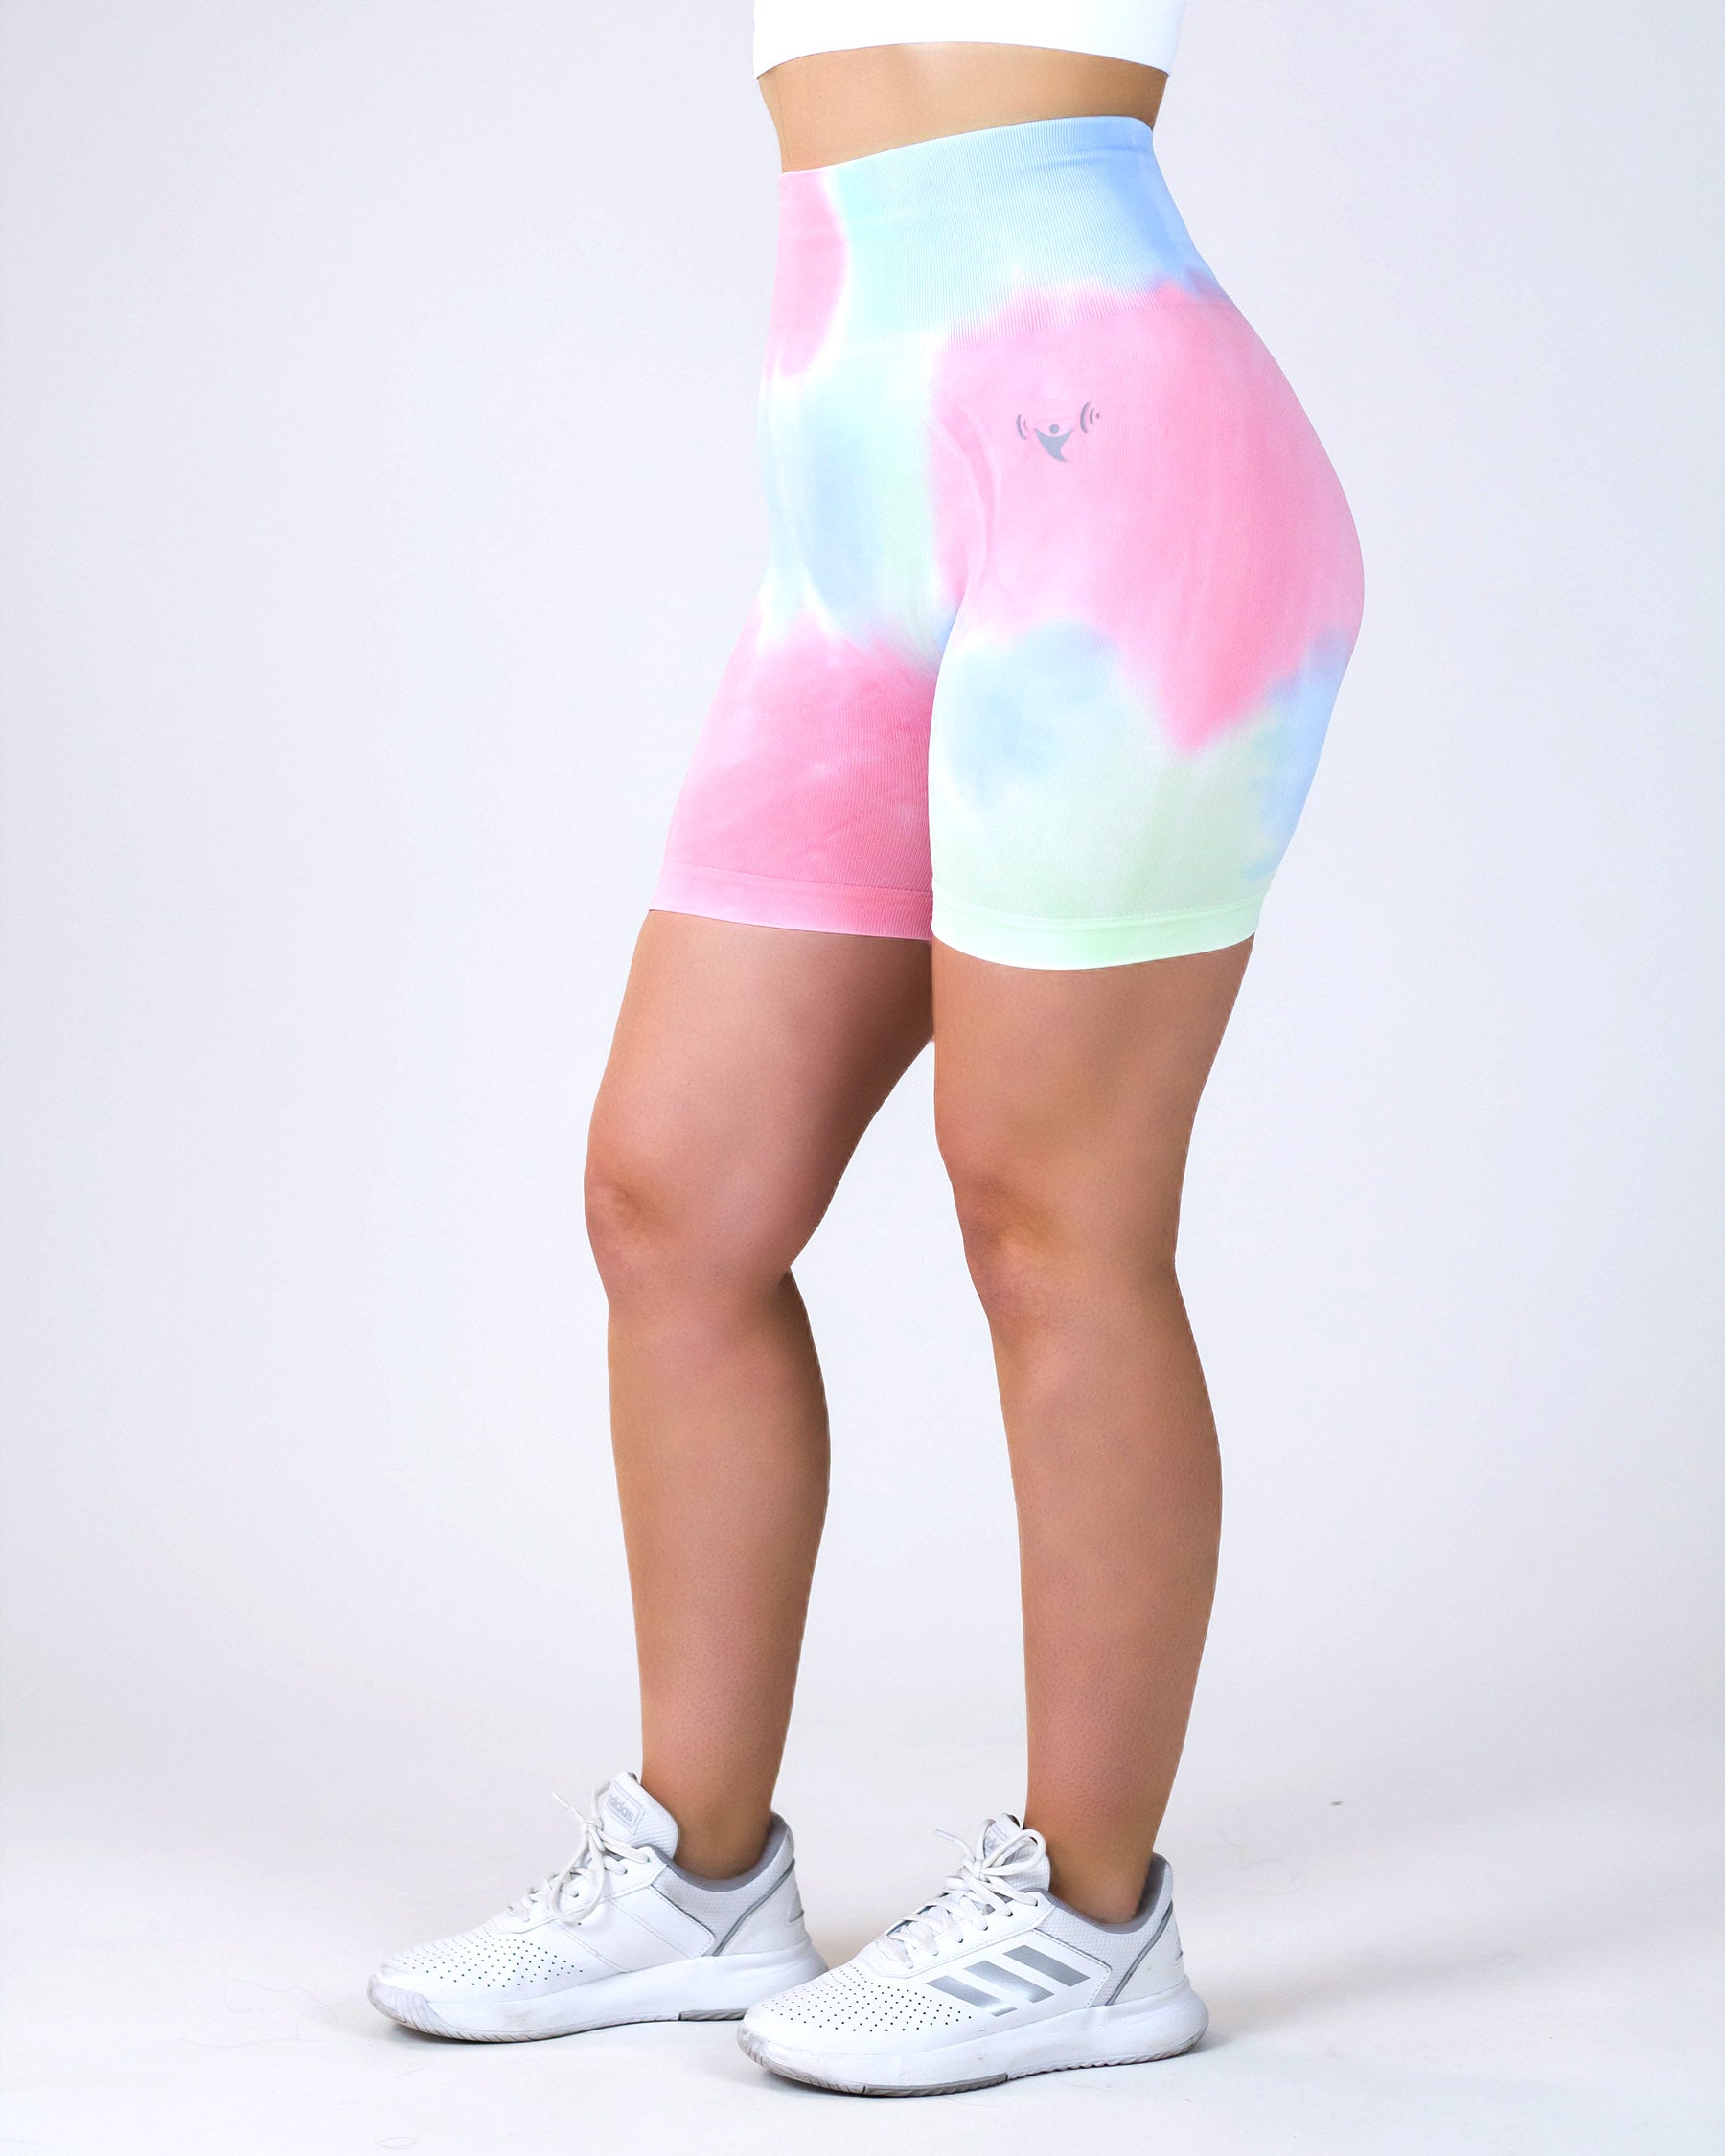 Scrunched Tie Dye Shorts - Cotton Candy